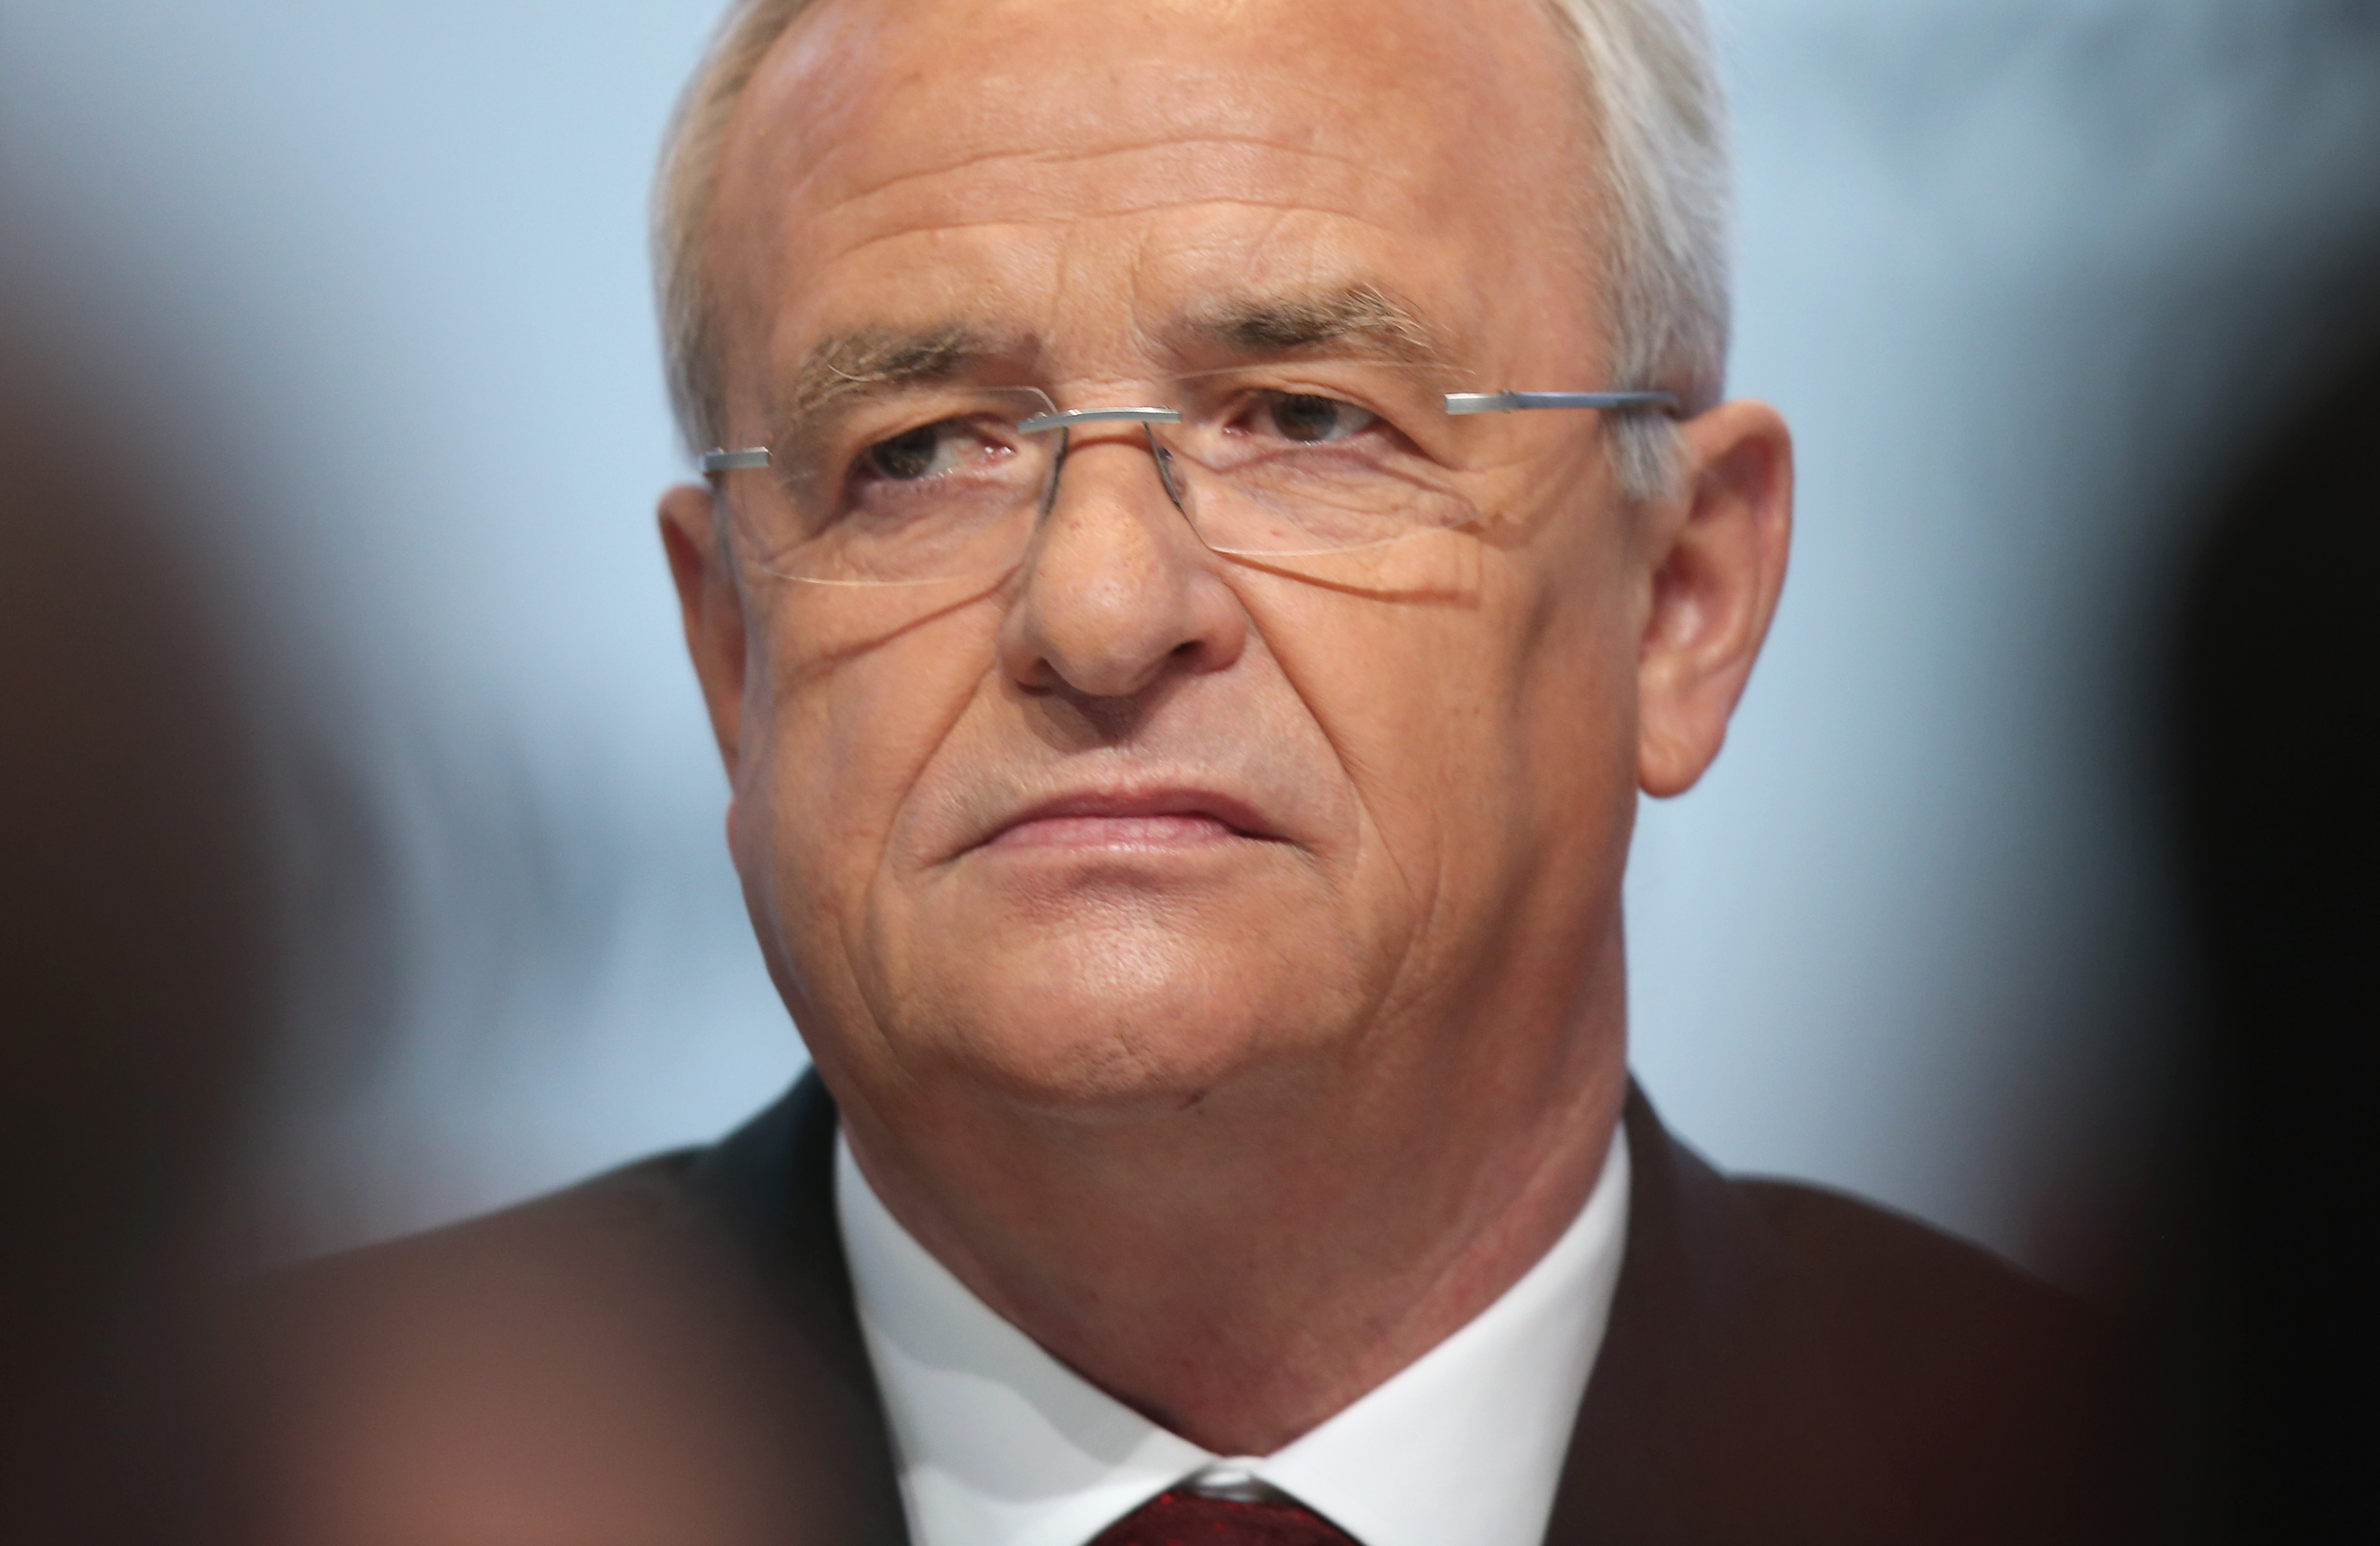 In this file photo Volkswagen CEO Martin Winterkorn attends the company's annual press conference on March 13, 2014 in Wolfsburg, Germany. (Sean Gallup&mdash;Getty Images)